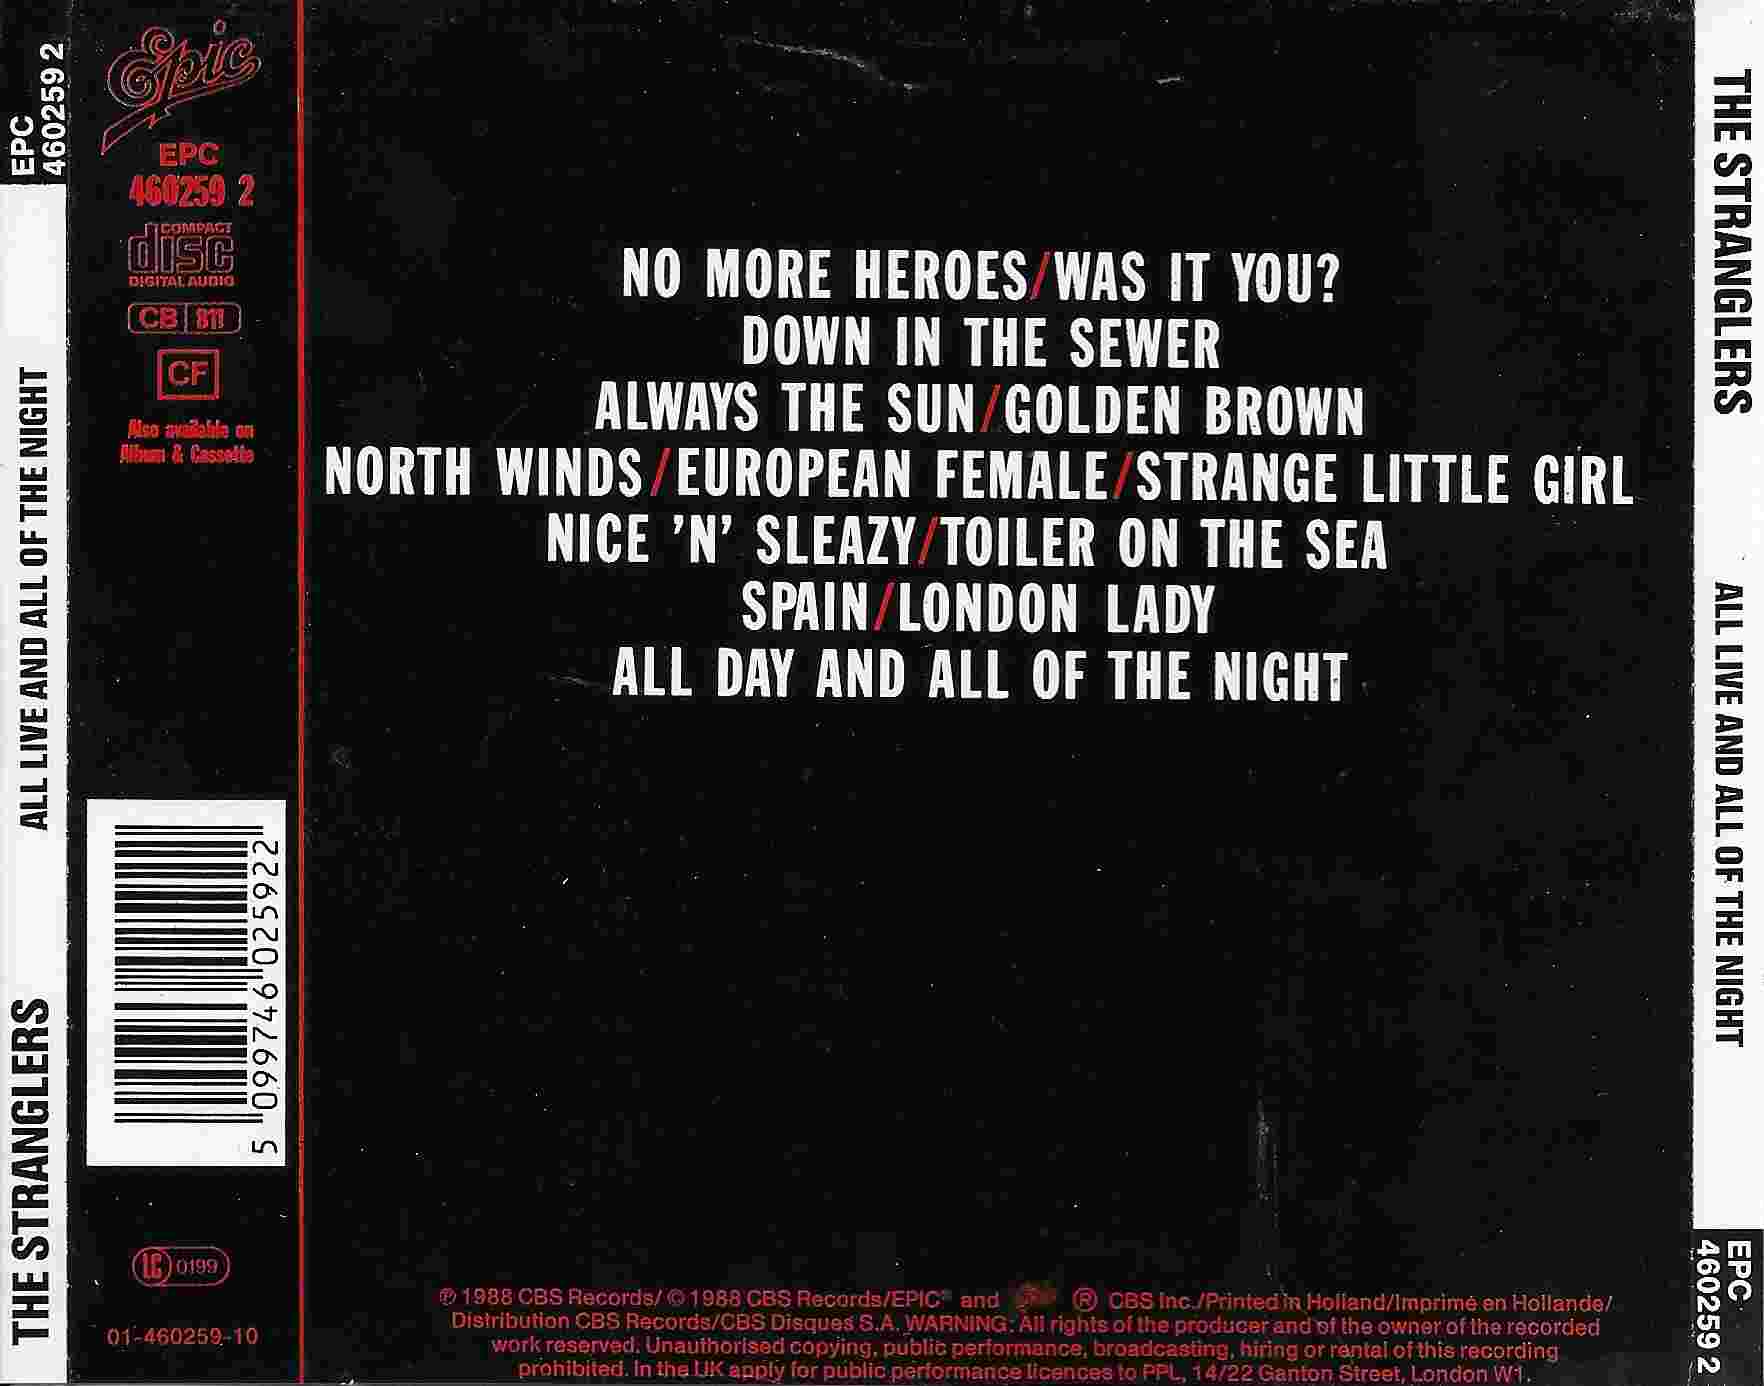 Picture of 460259 2 All live and all of the night by artist The Stranglers from The Stranglers